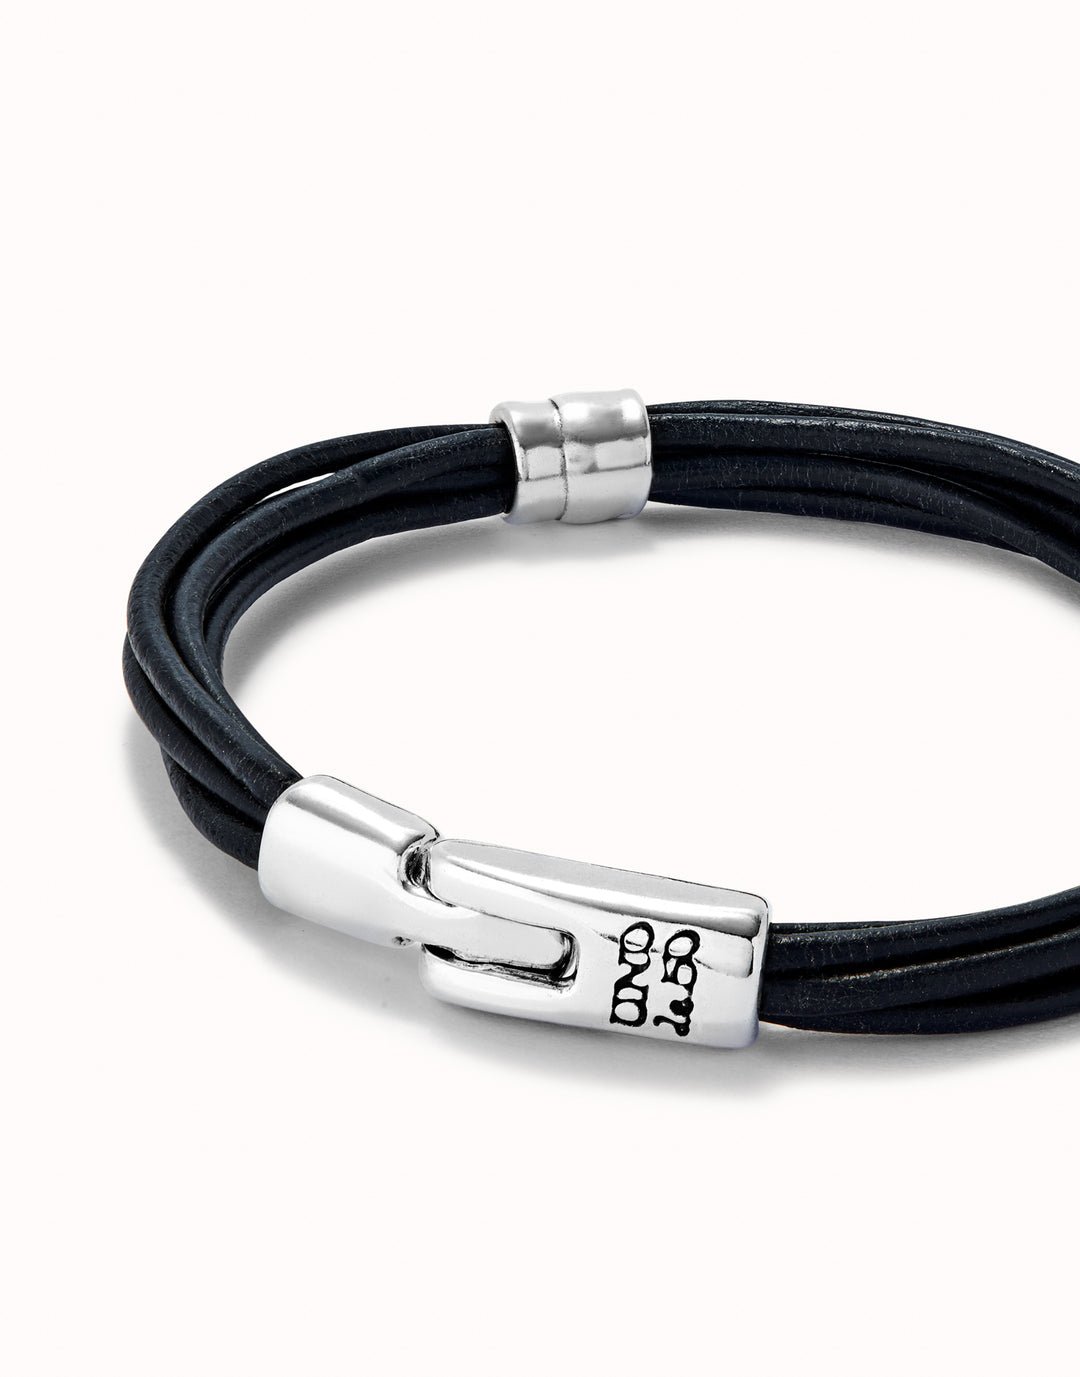 CORDED LEATHER BLACK BRACELET WITH RONDELLES-SILVER